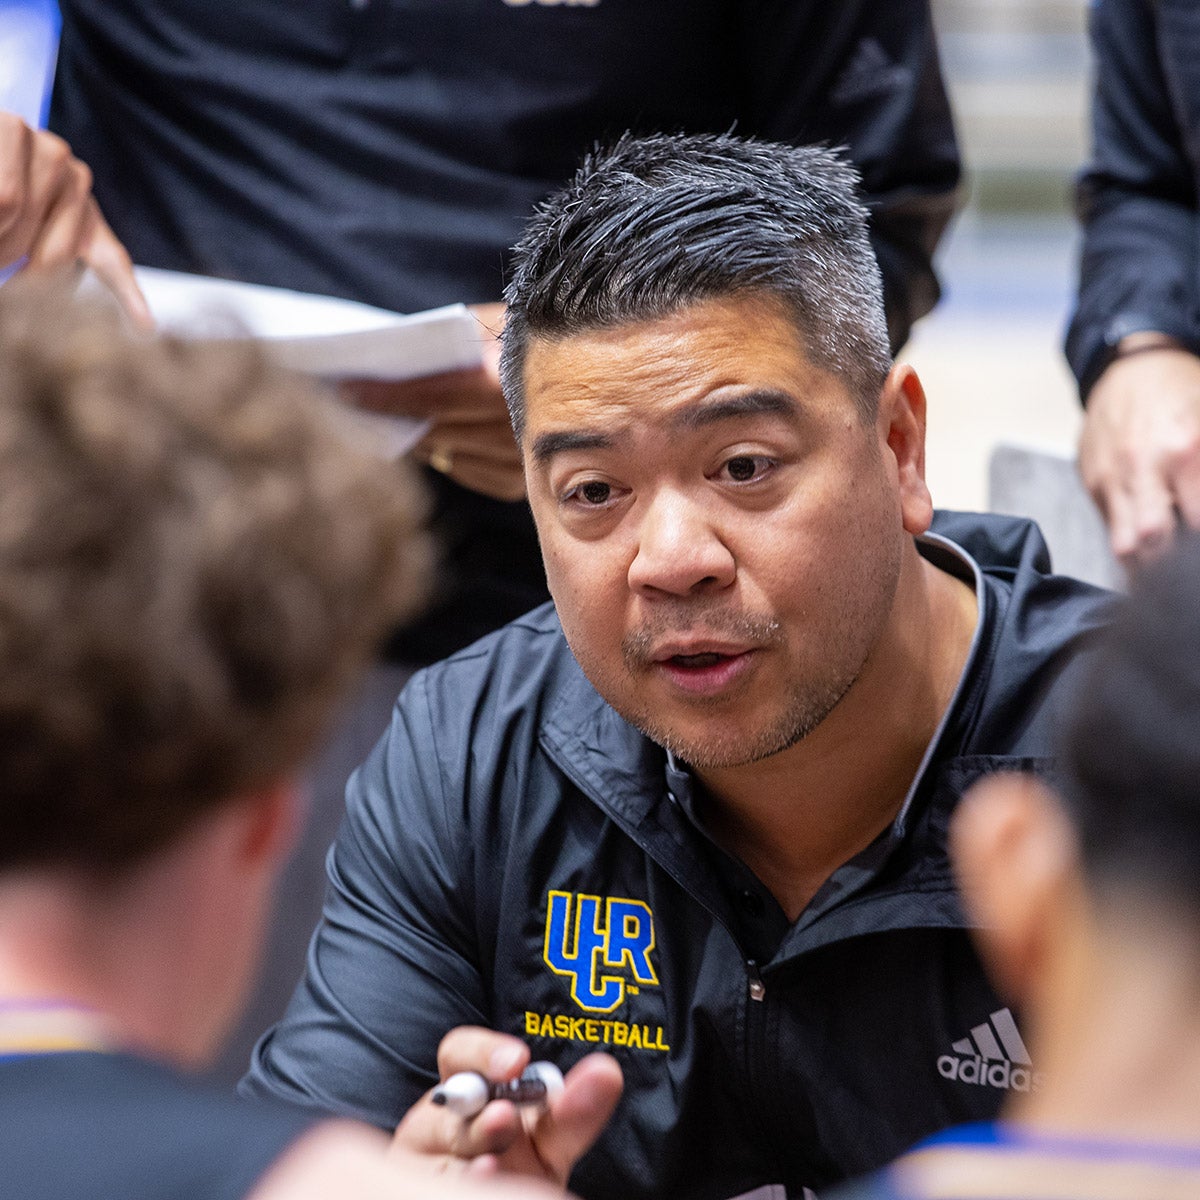 UCR's men's basketball coach, Mike Magpayo, chats with his team during a timeout during a game. Maypayo is the first Division I men's basketball coach of Asian descent.